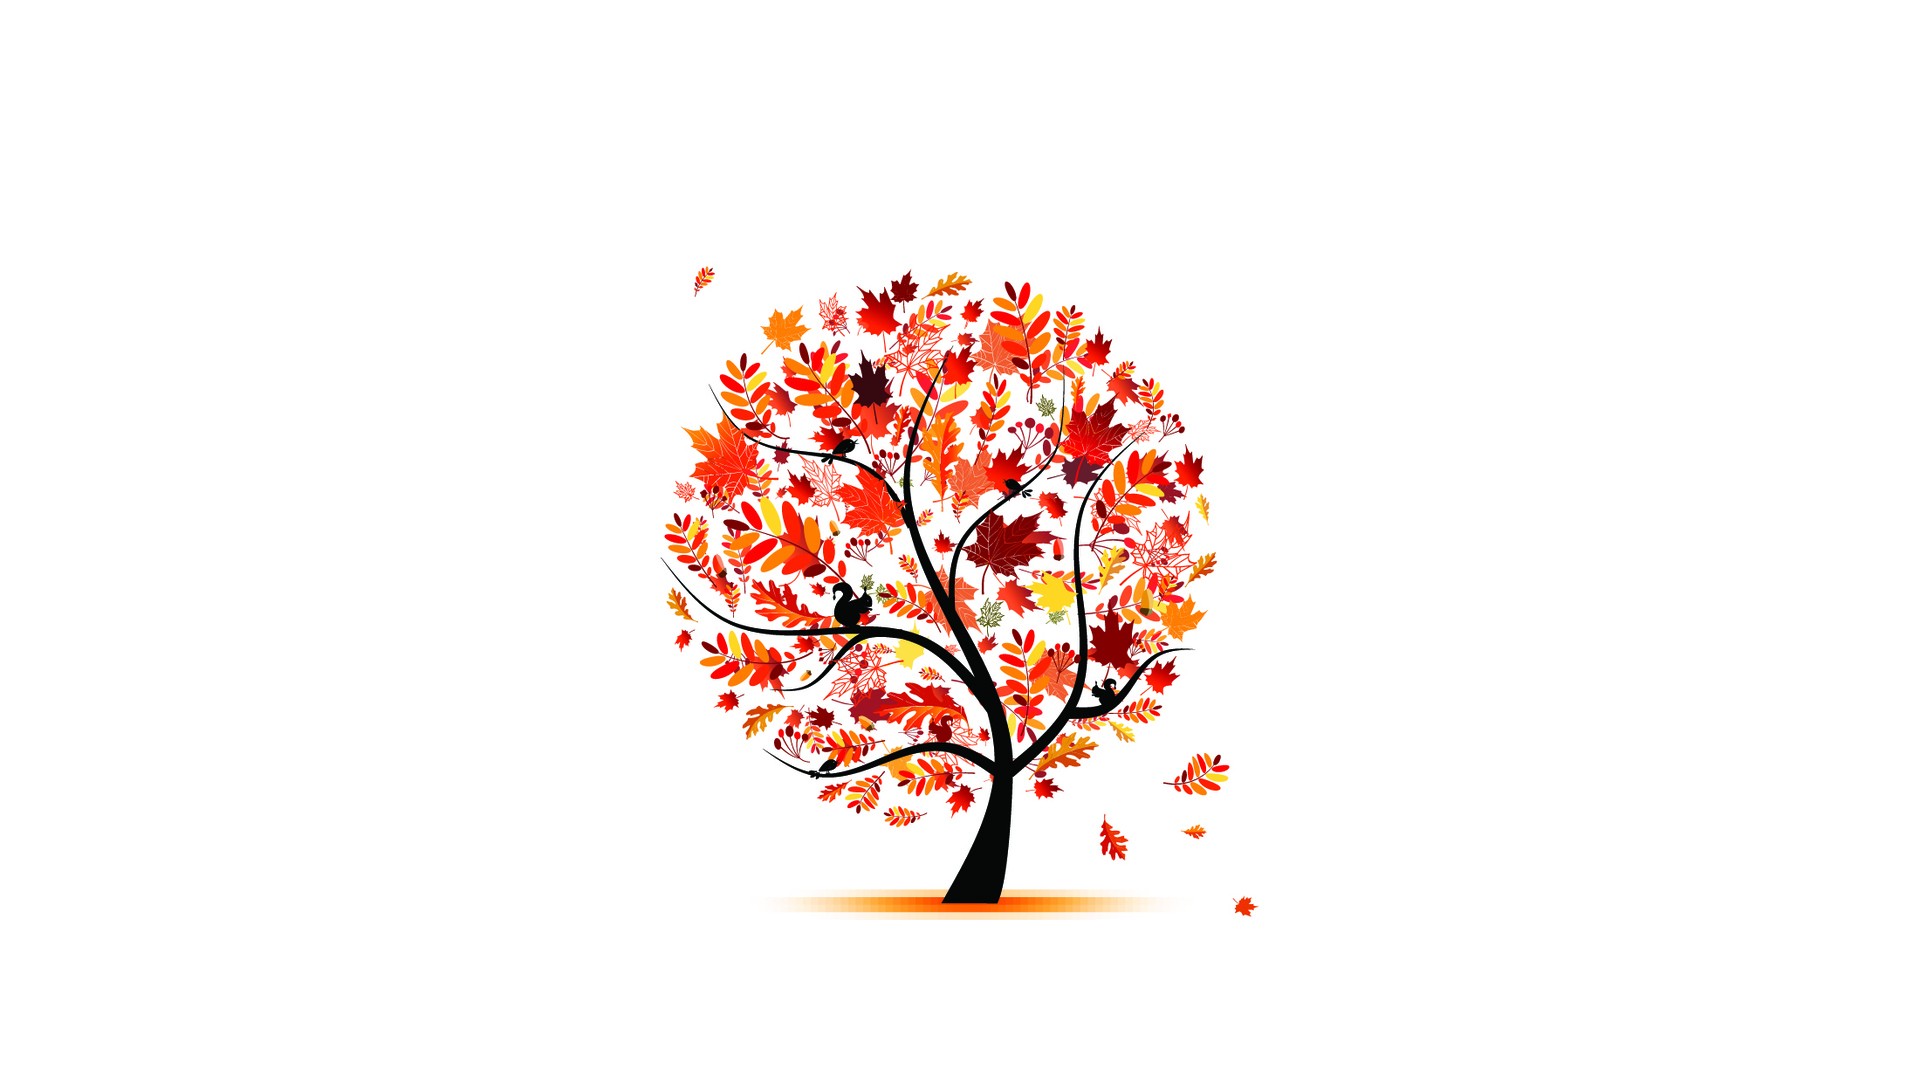 trees, Autumn, Leaves, Artwork, Simple, Background, White, Background Wallpaper